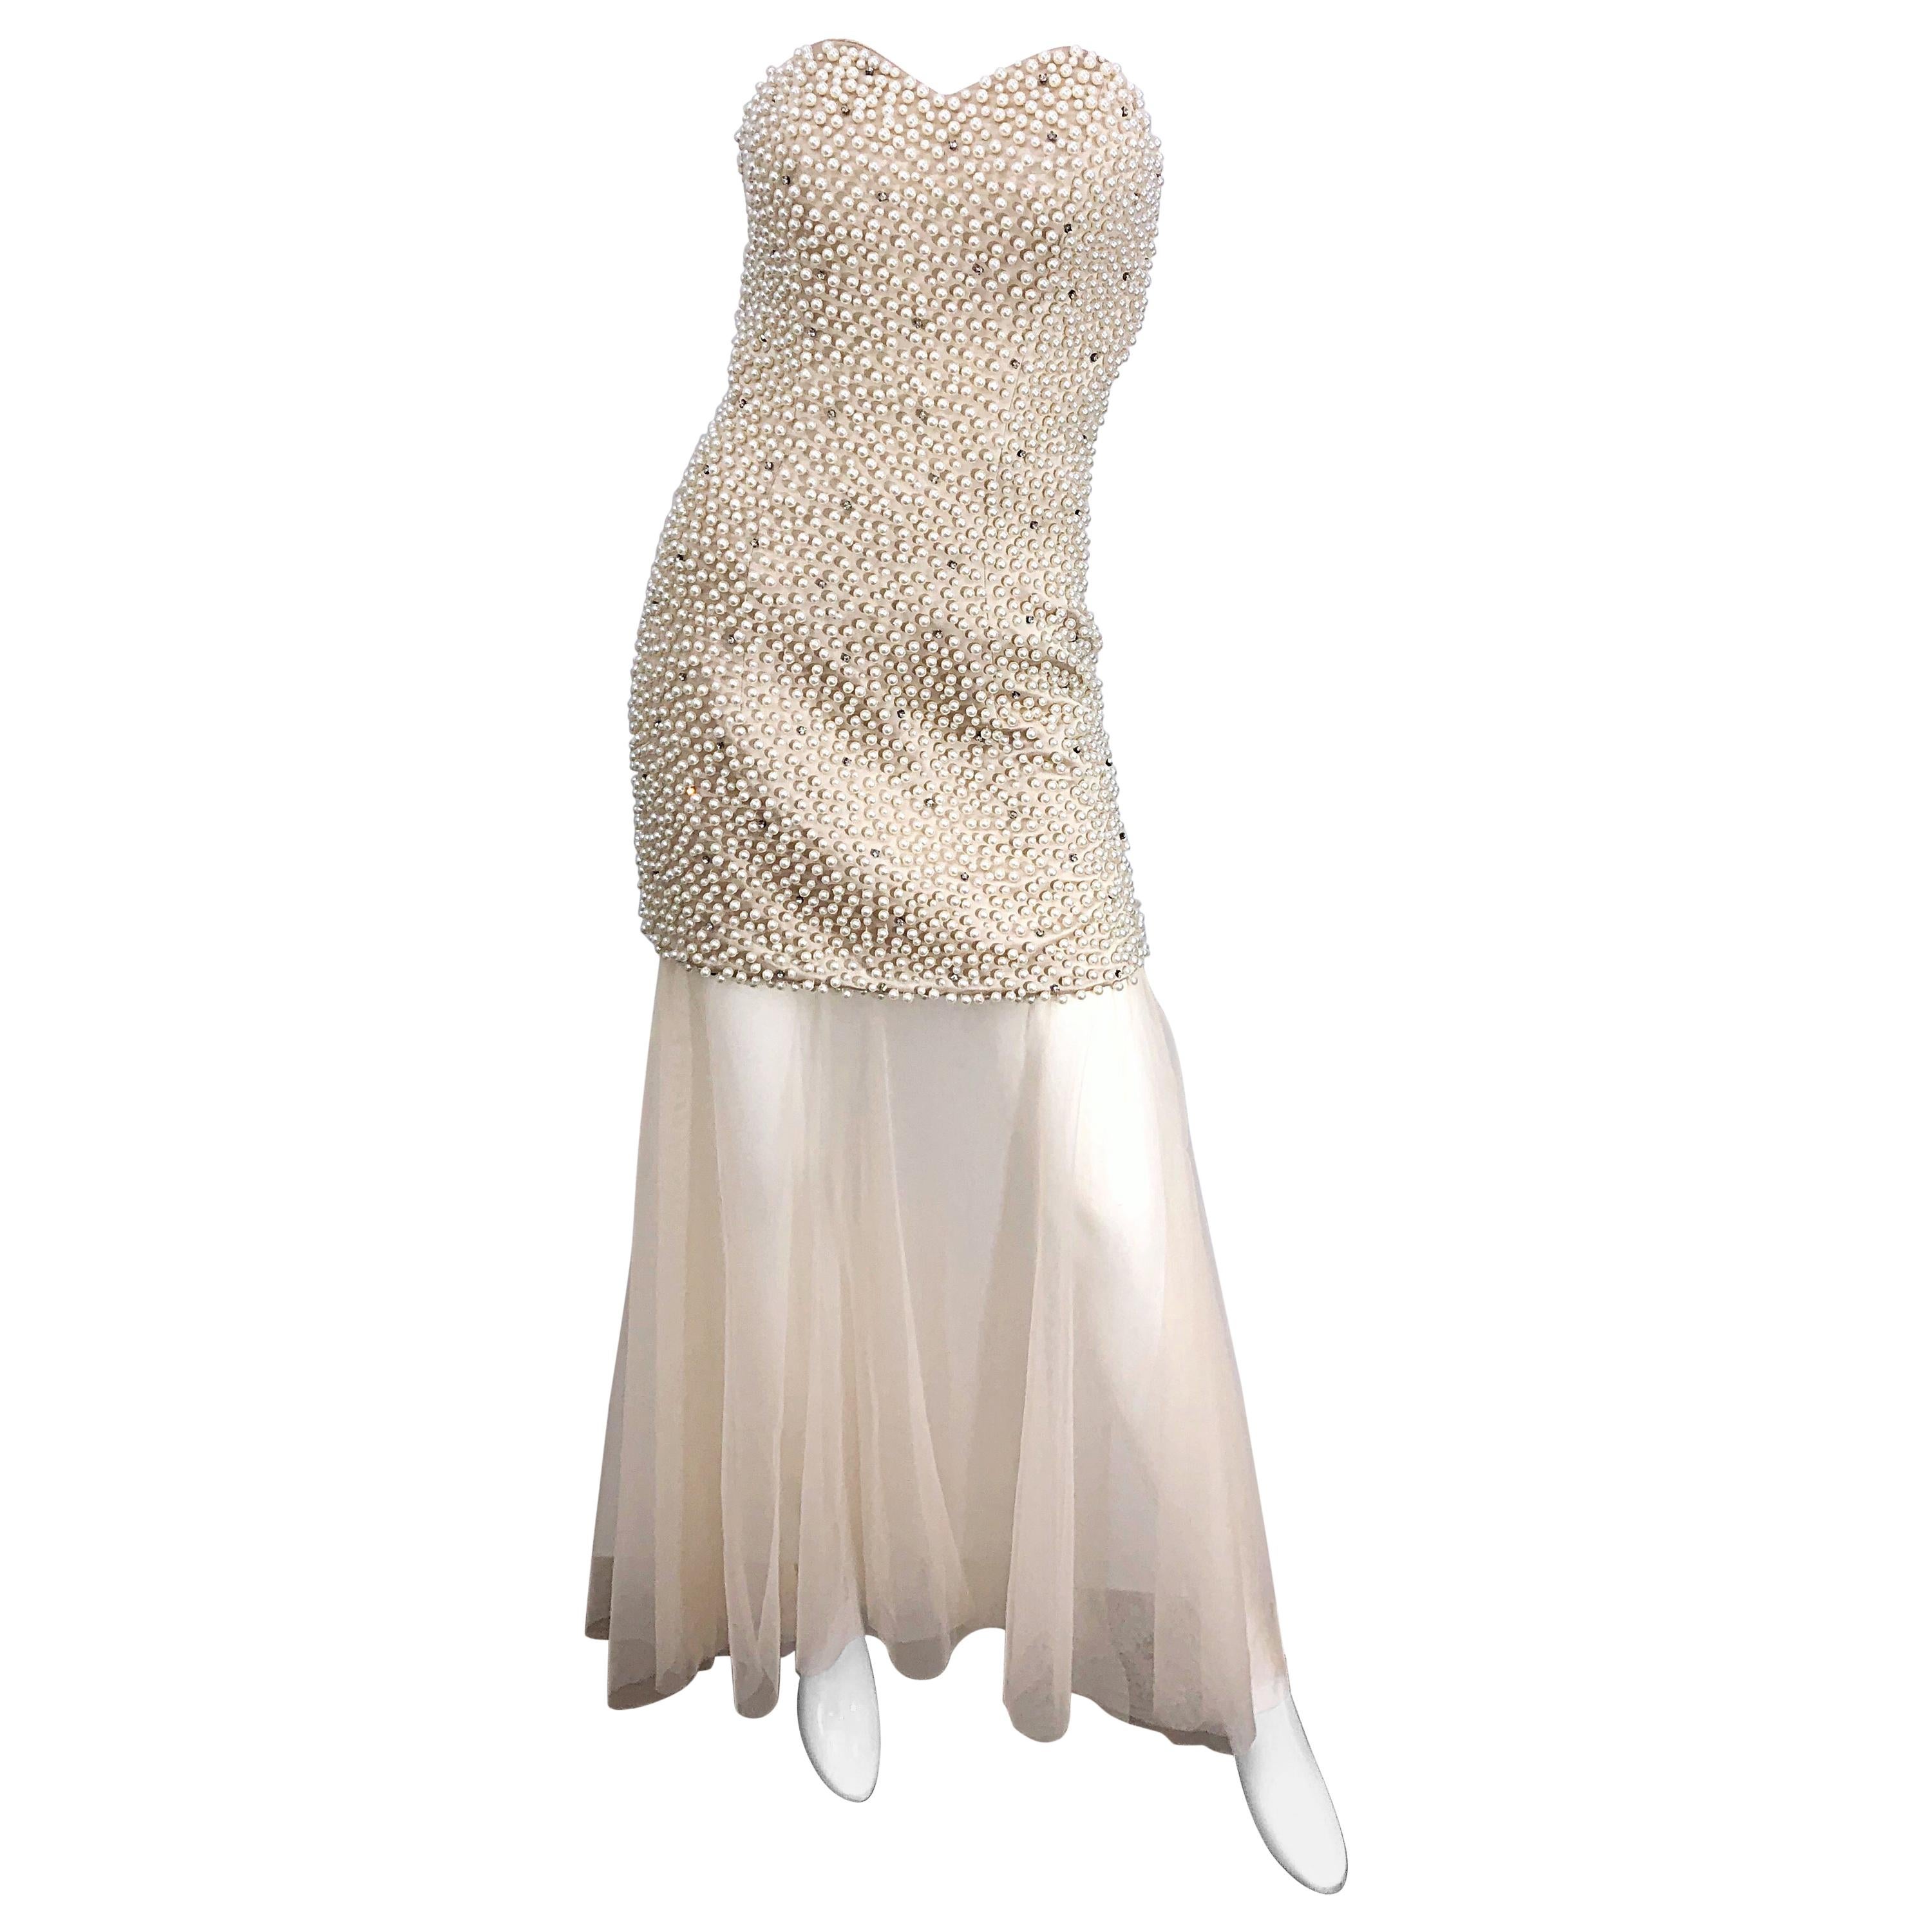 Phenomenal 1980s Couture Pearl + Rhinestone Encrusted Strapless Beige 80s Gown